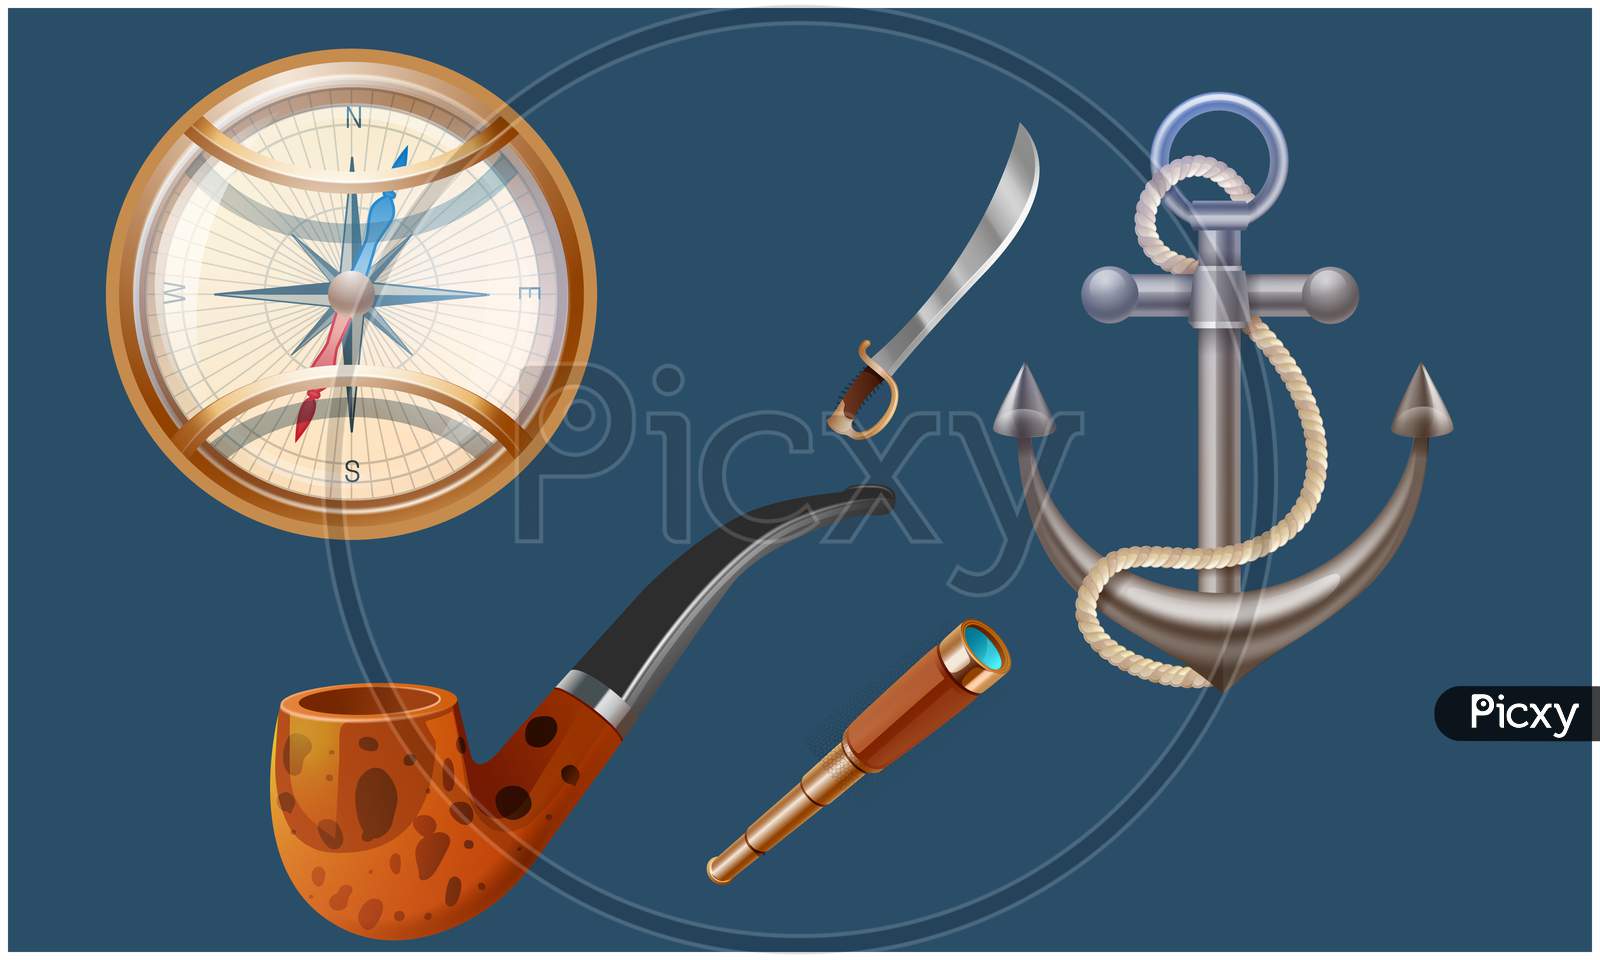 Mock Up Illustration Of Treasure Hunt Game Equipment On Abstract Backgrounds